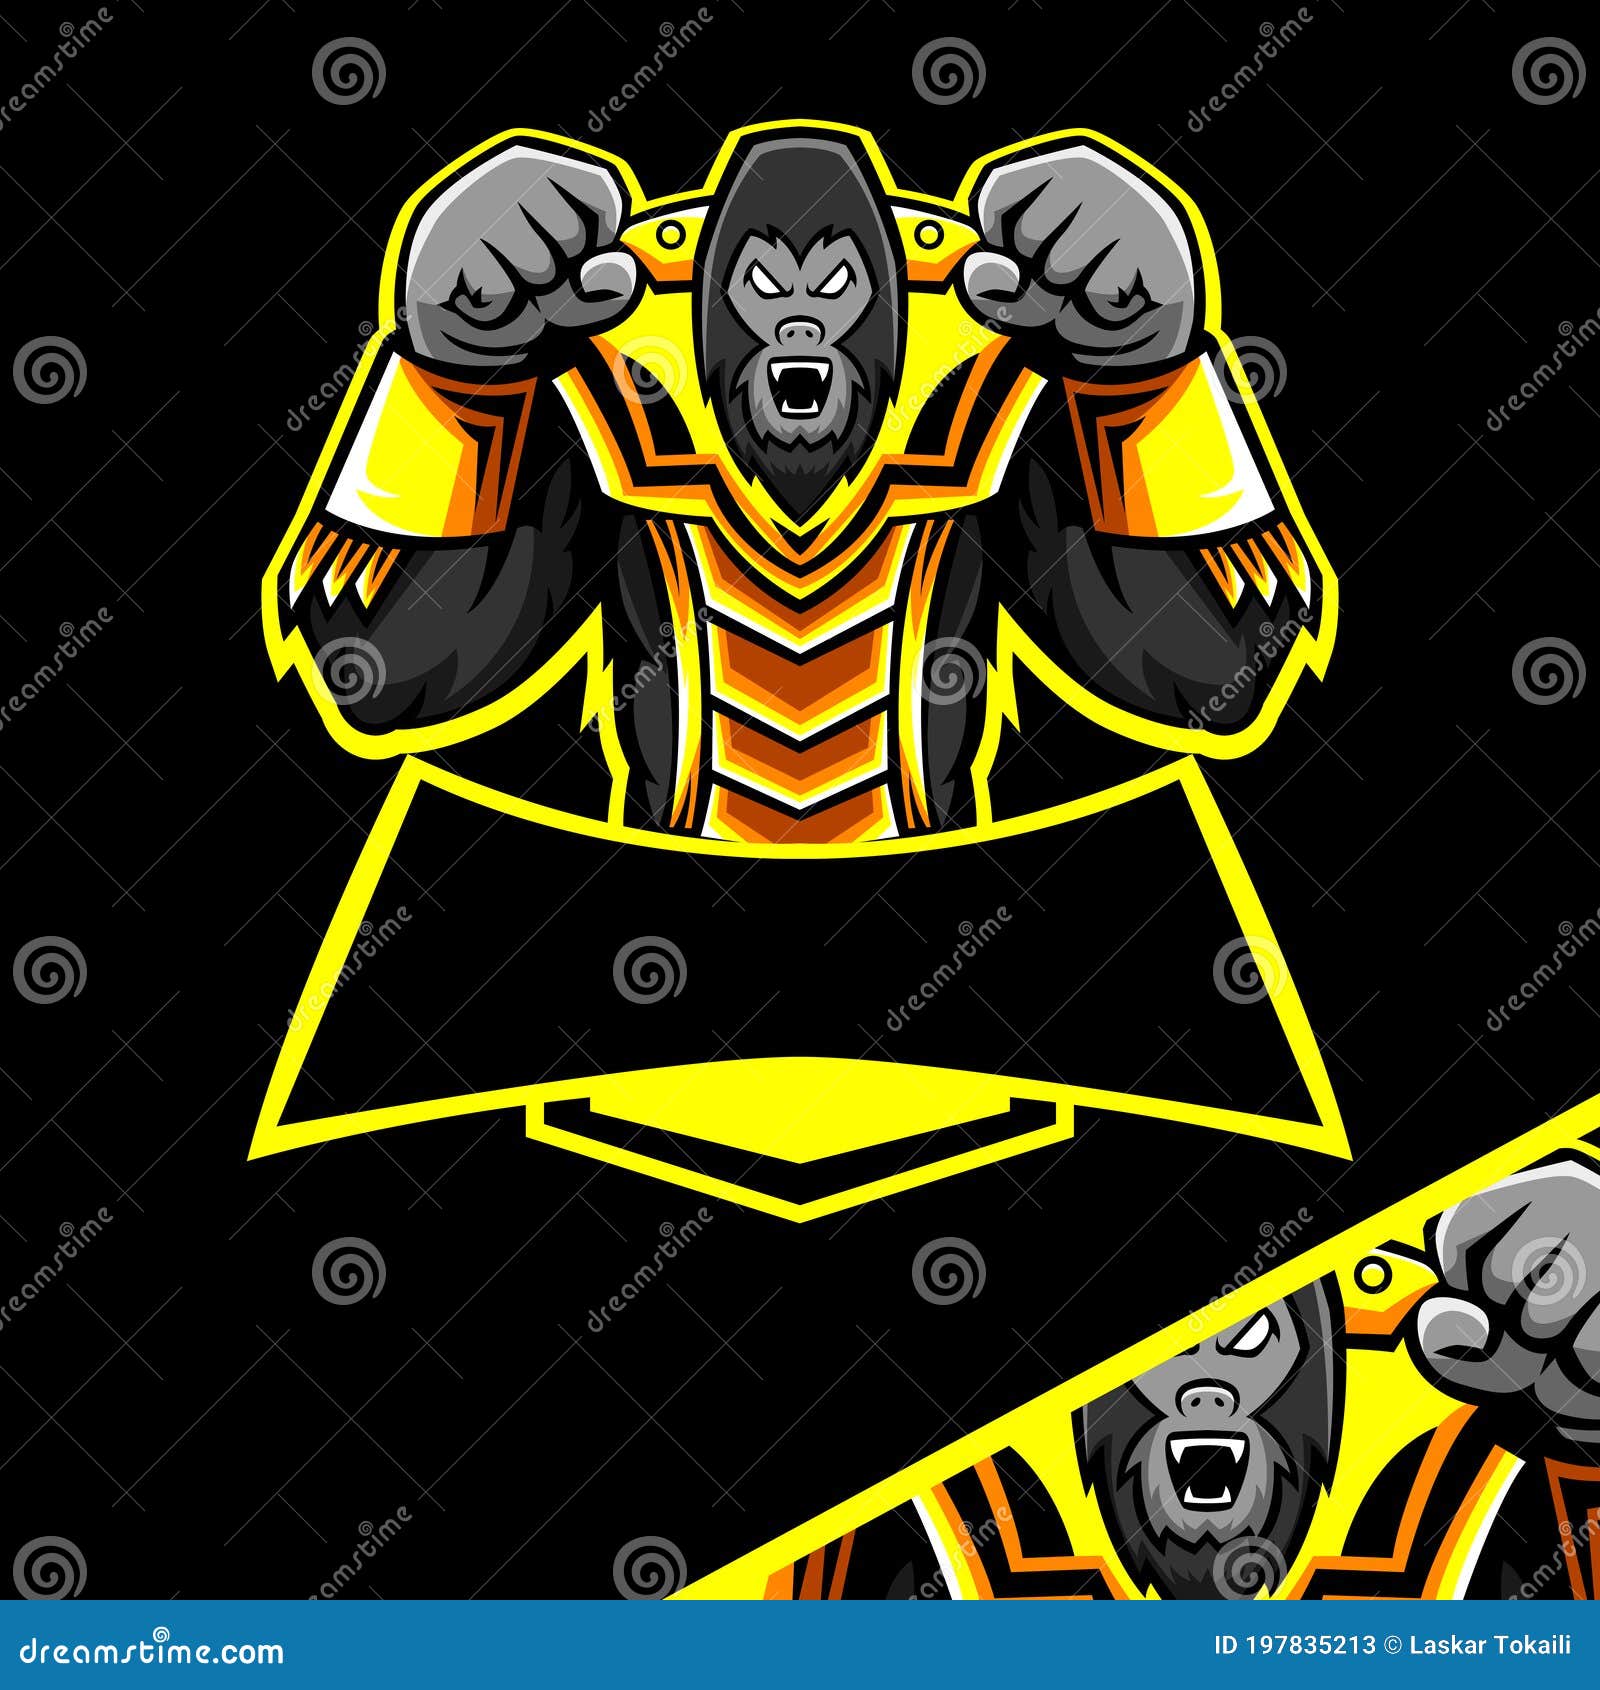 Mascot Logo Gorilla Esport Boxing Pose with Gold Armour in Black Background  Stock Illustration - Illustration of boxing, jungle: 197835213